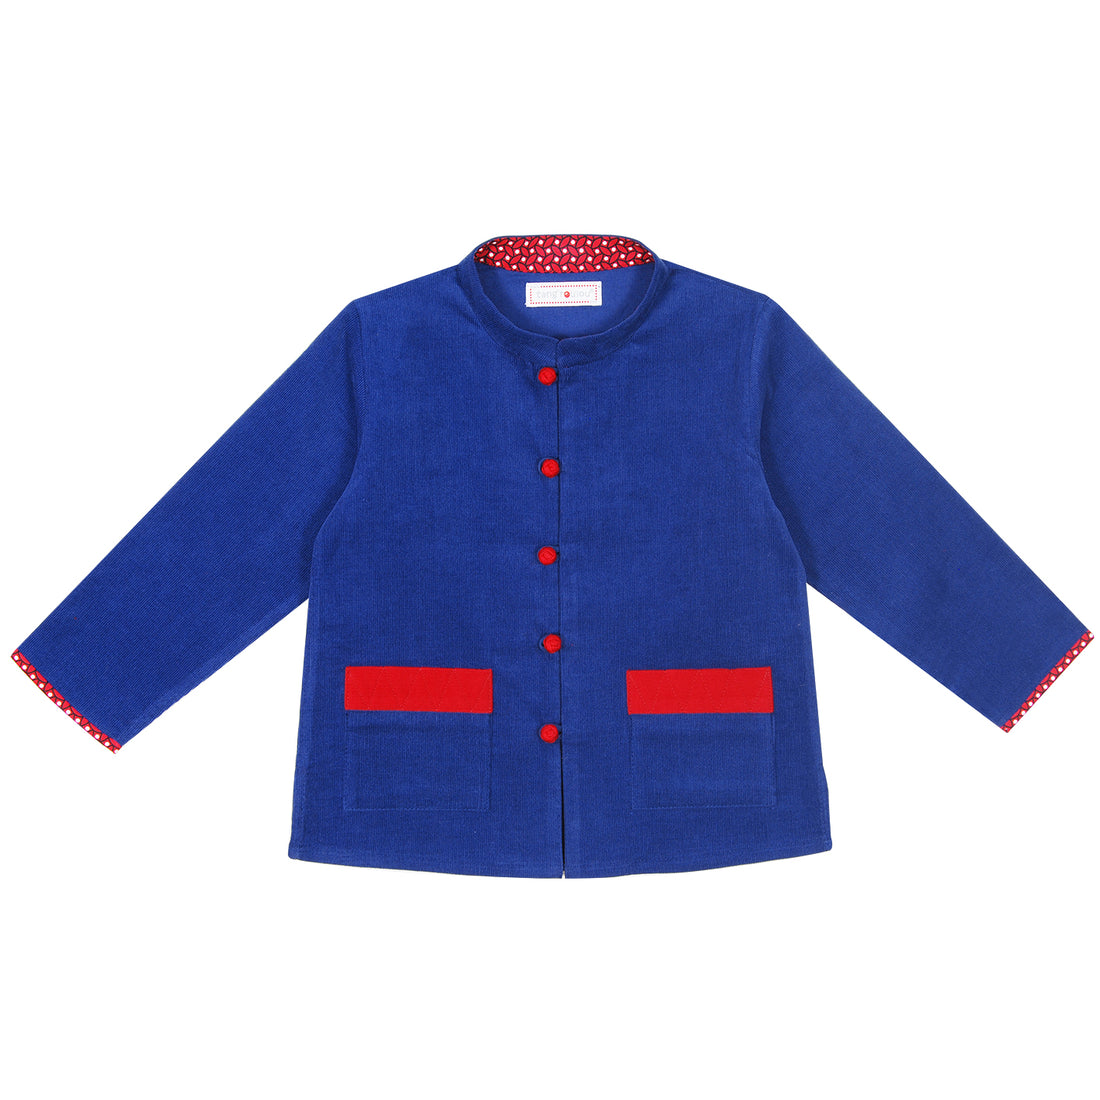 tang-roulou-outerwear-blue-with-pocket-